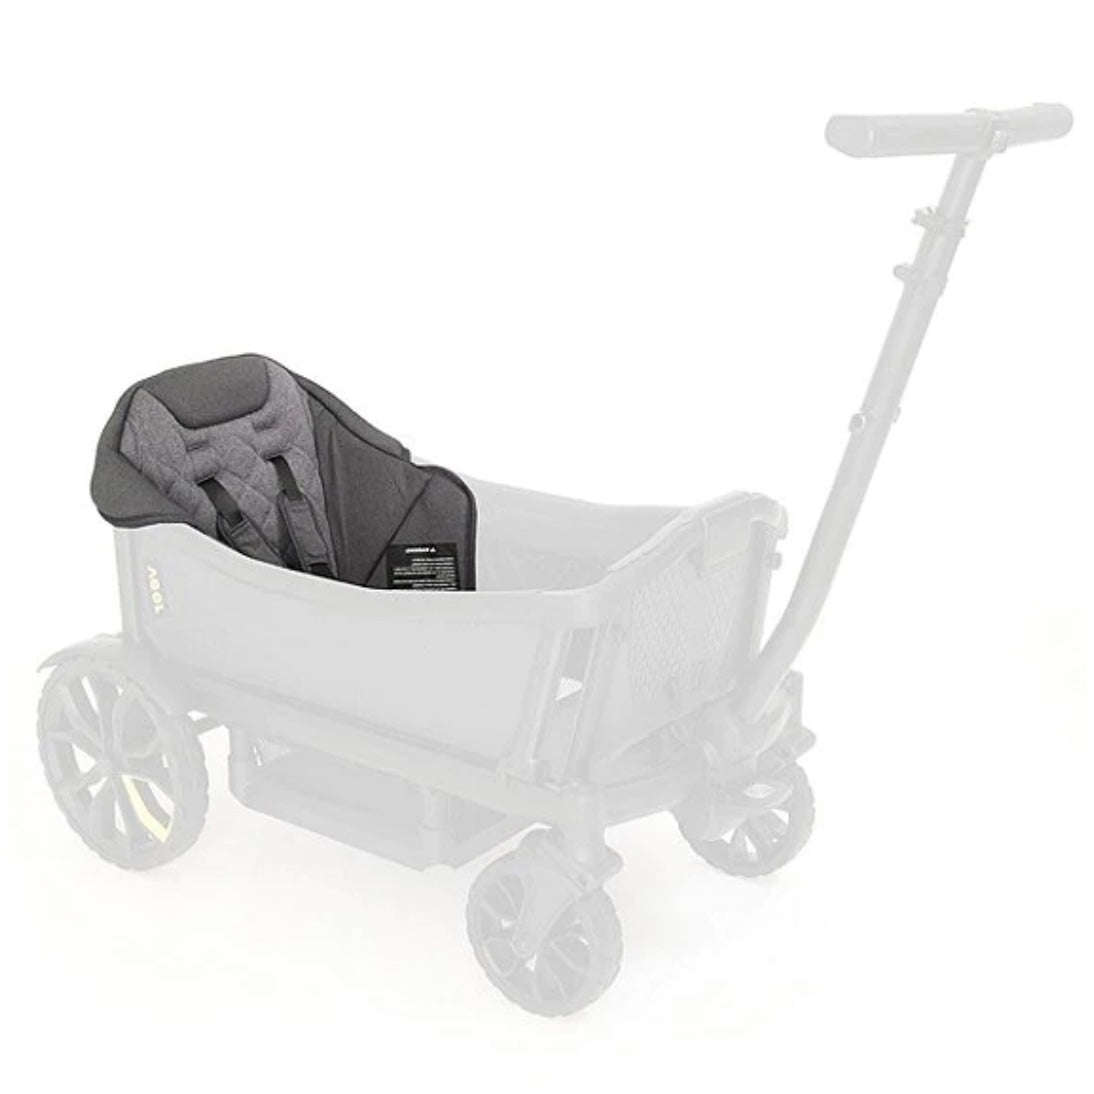 Veer Cruiser Comfort Seat For Toddlers